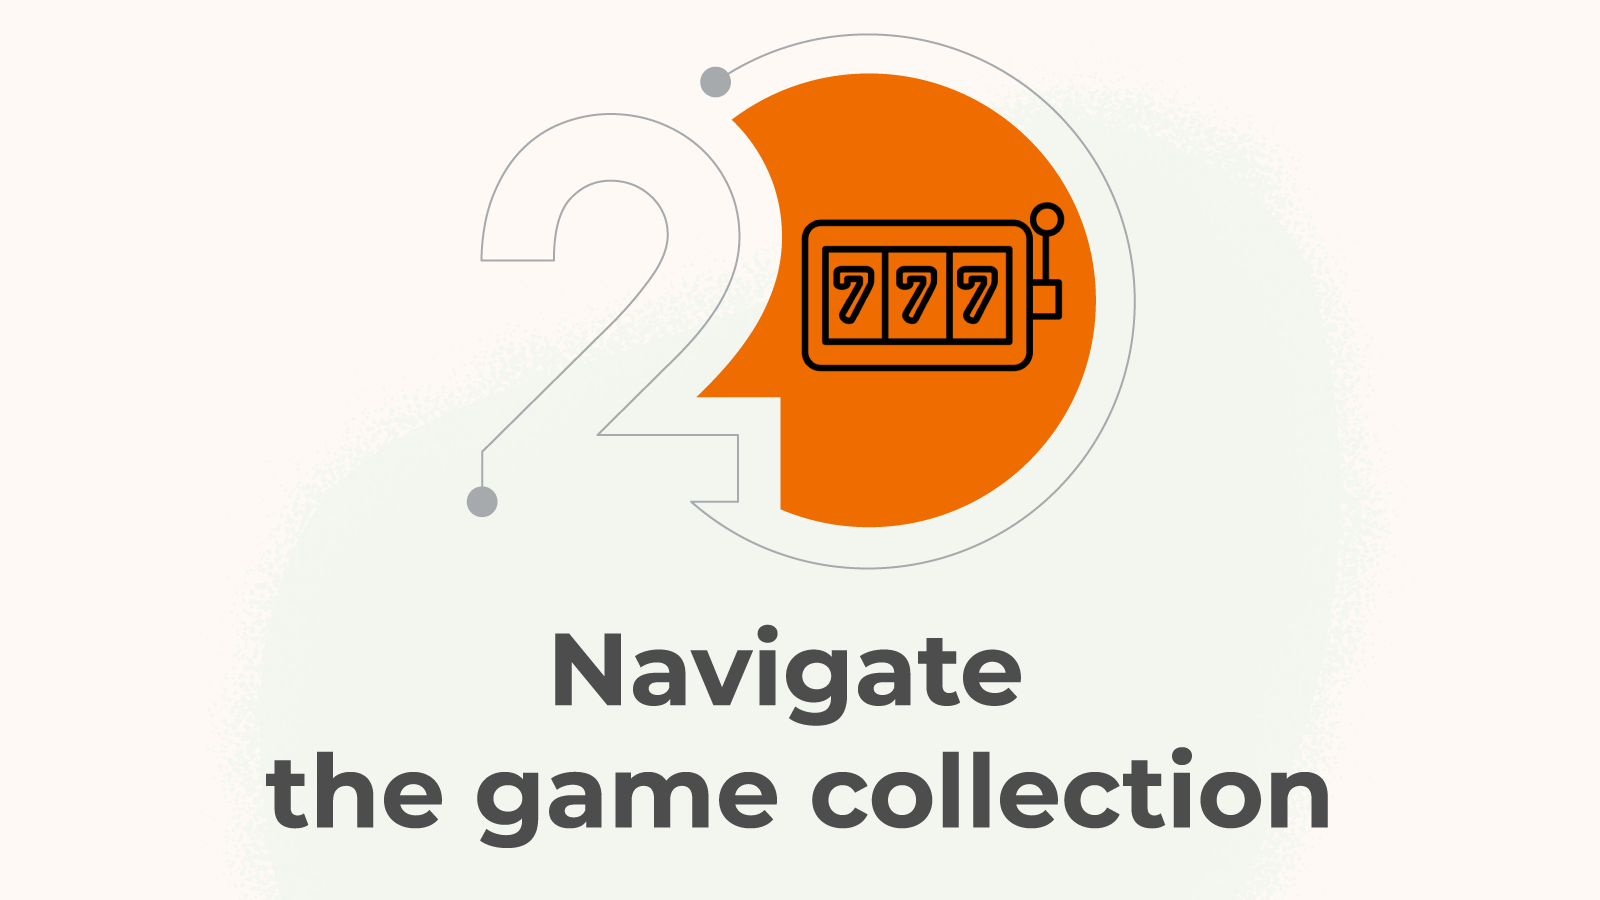 Navigate the game collection